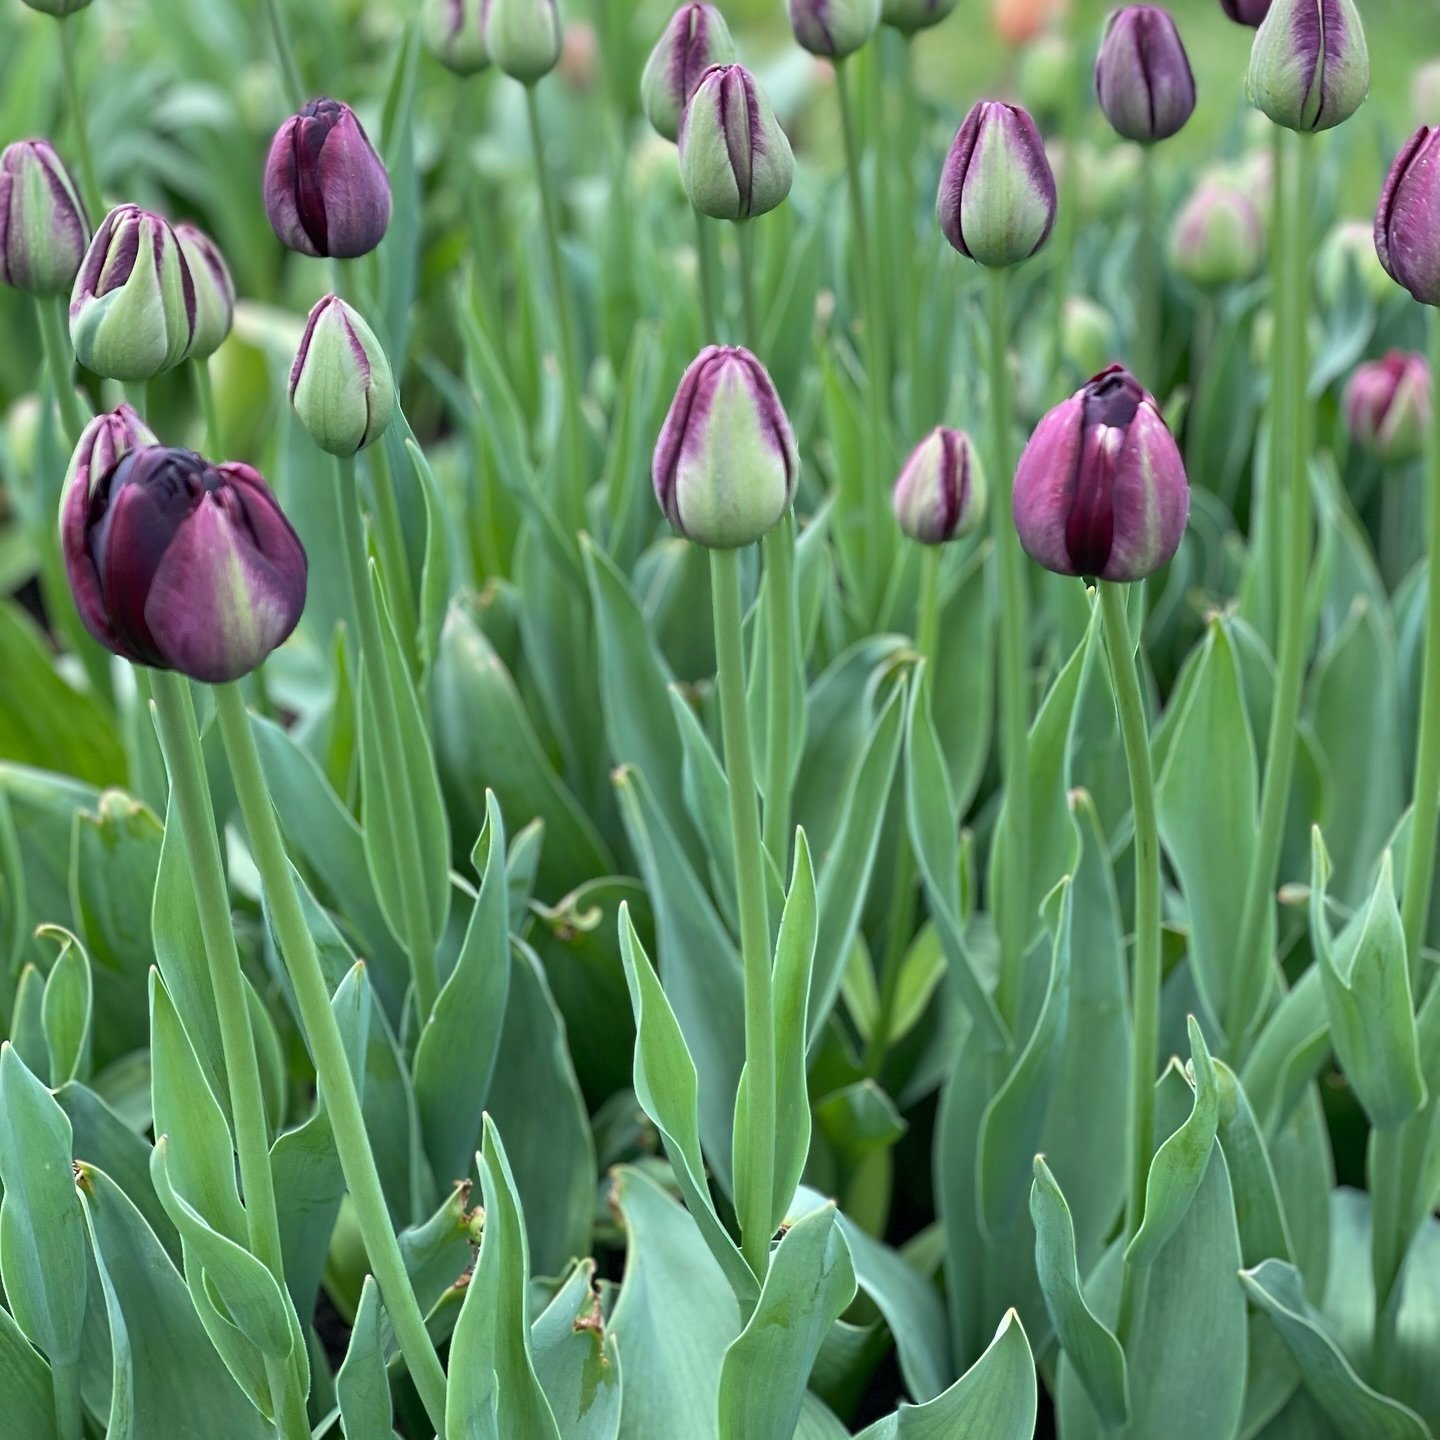 Tulip Black Hero. Just budding up and ready to pick for our Friday orders. Quite a few other varieties available too!  Please get in touch if you would like to be included in our orders this week. We are doing deliveries to Bledlow Ridge, Radnage and